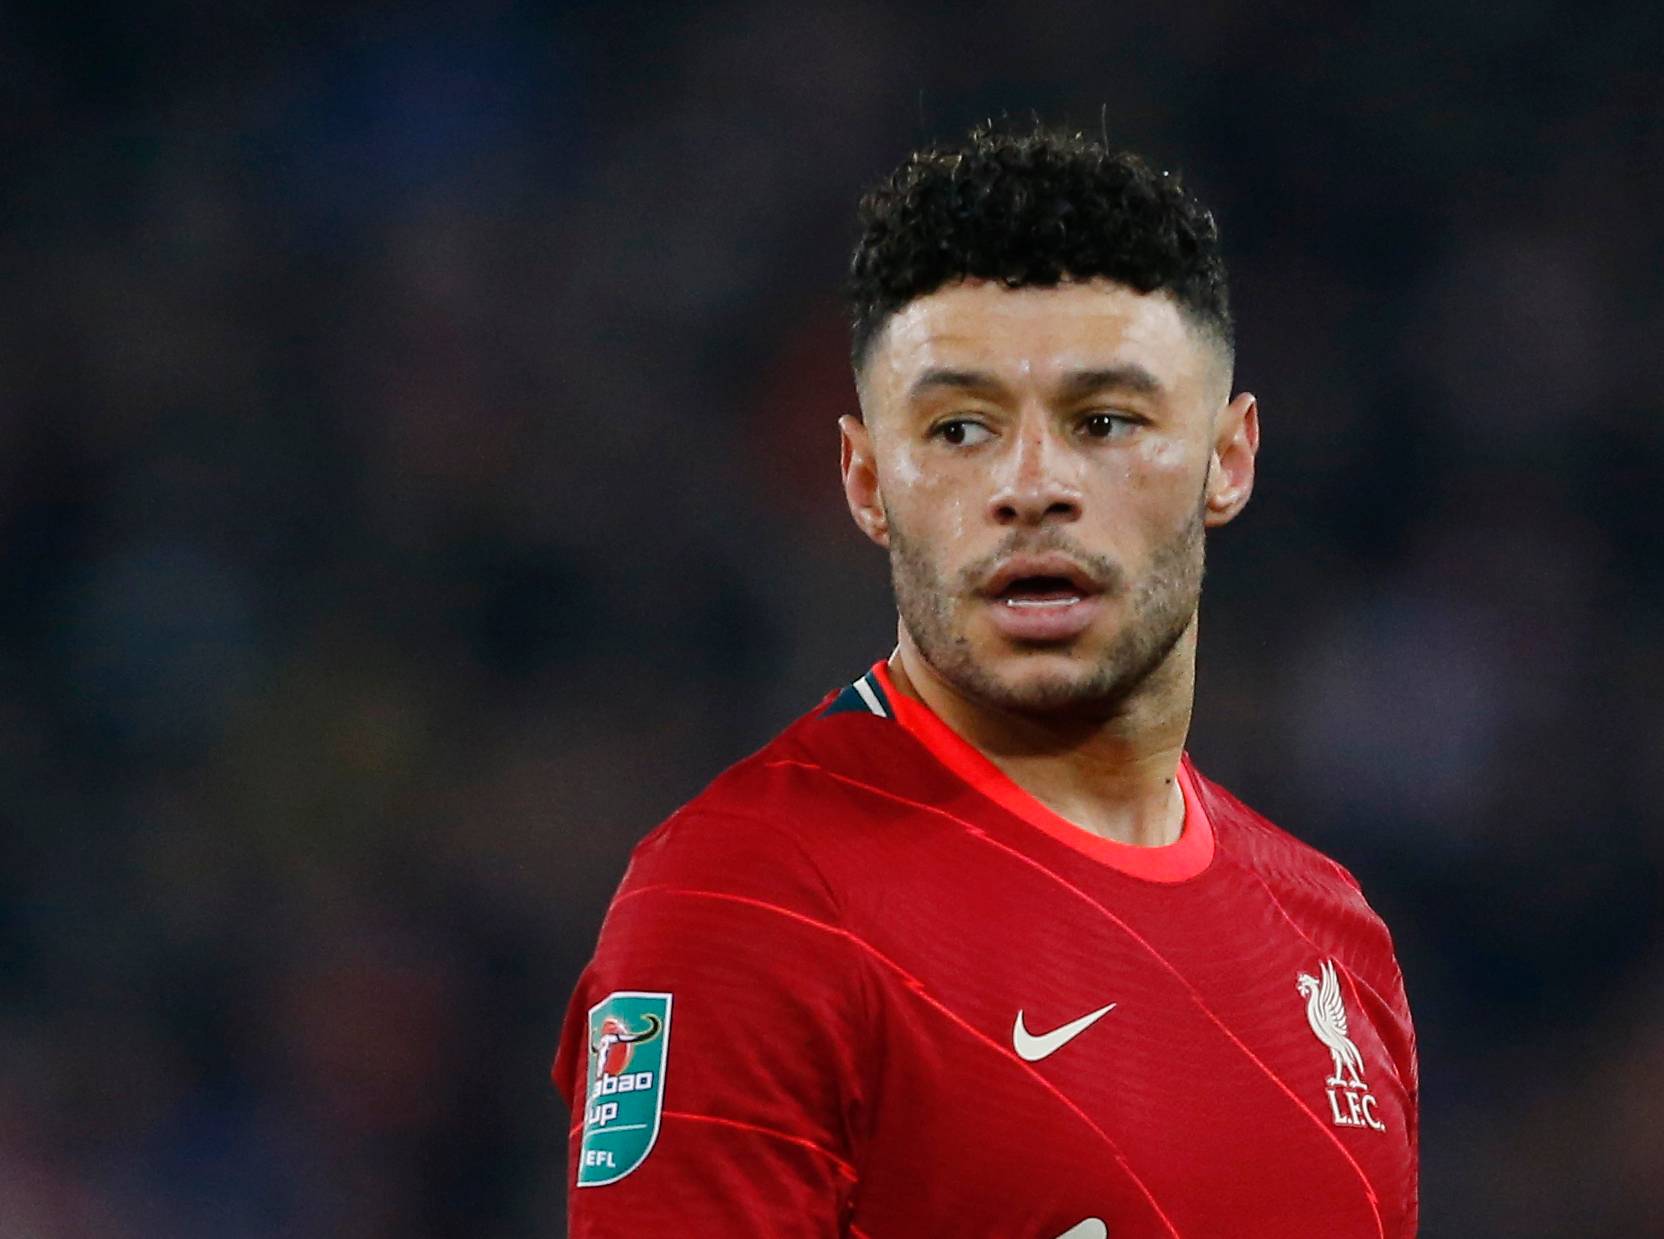 Southampton in the race to sign Alex Oxlade-Chamberlain - Premier League News